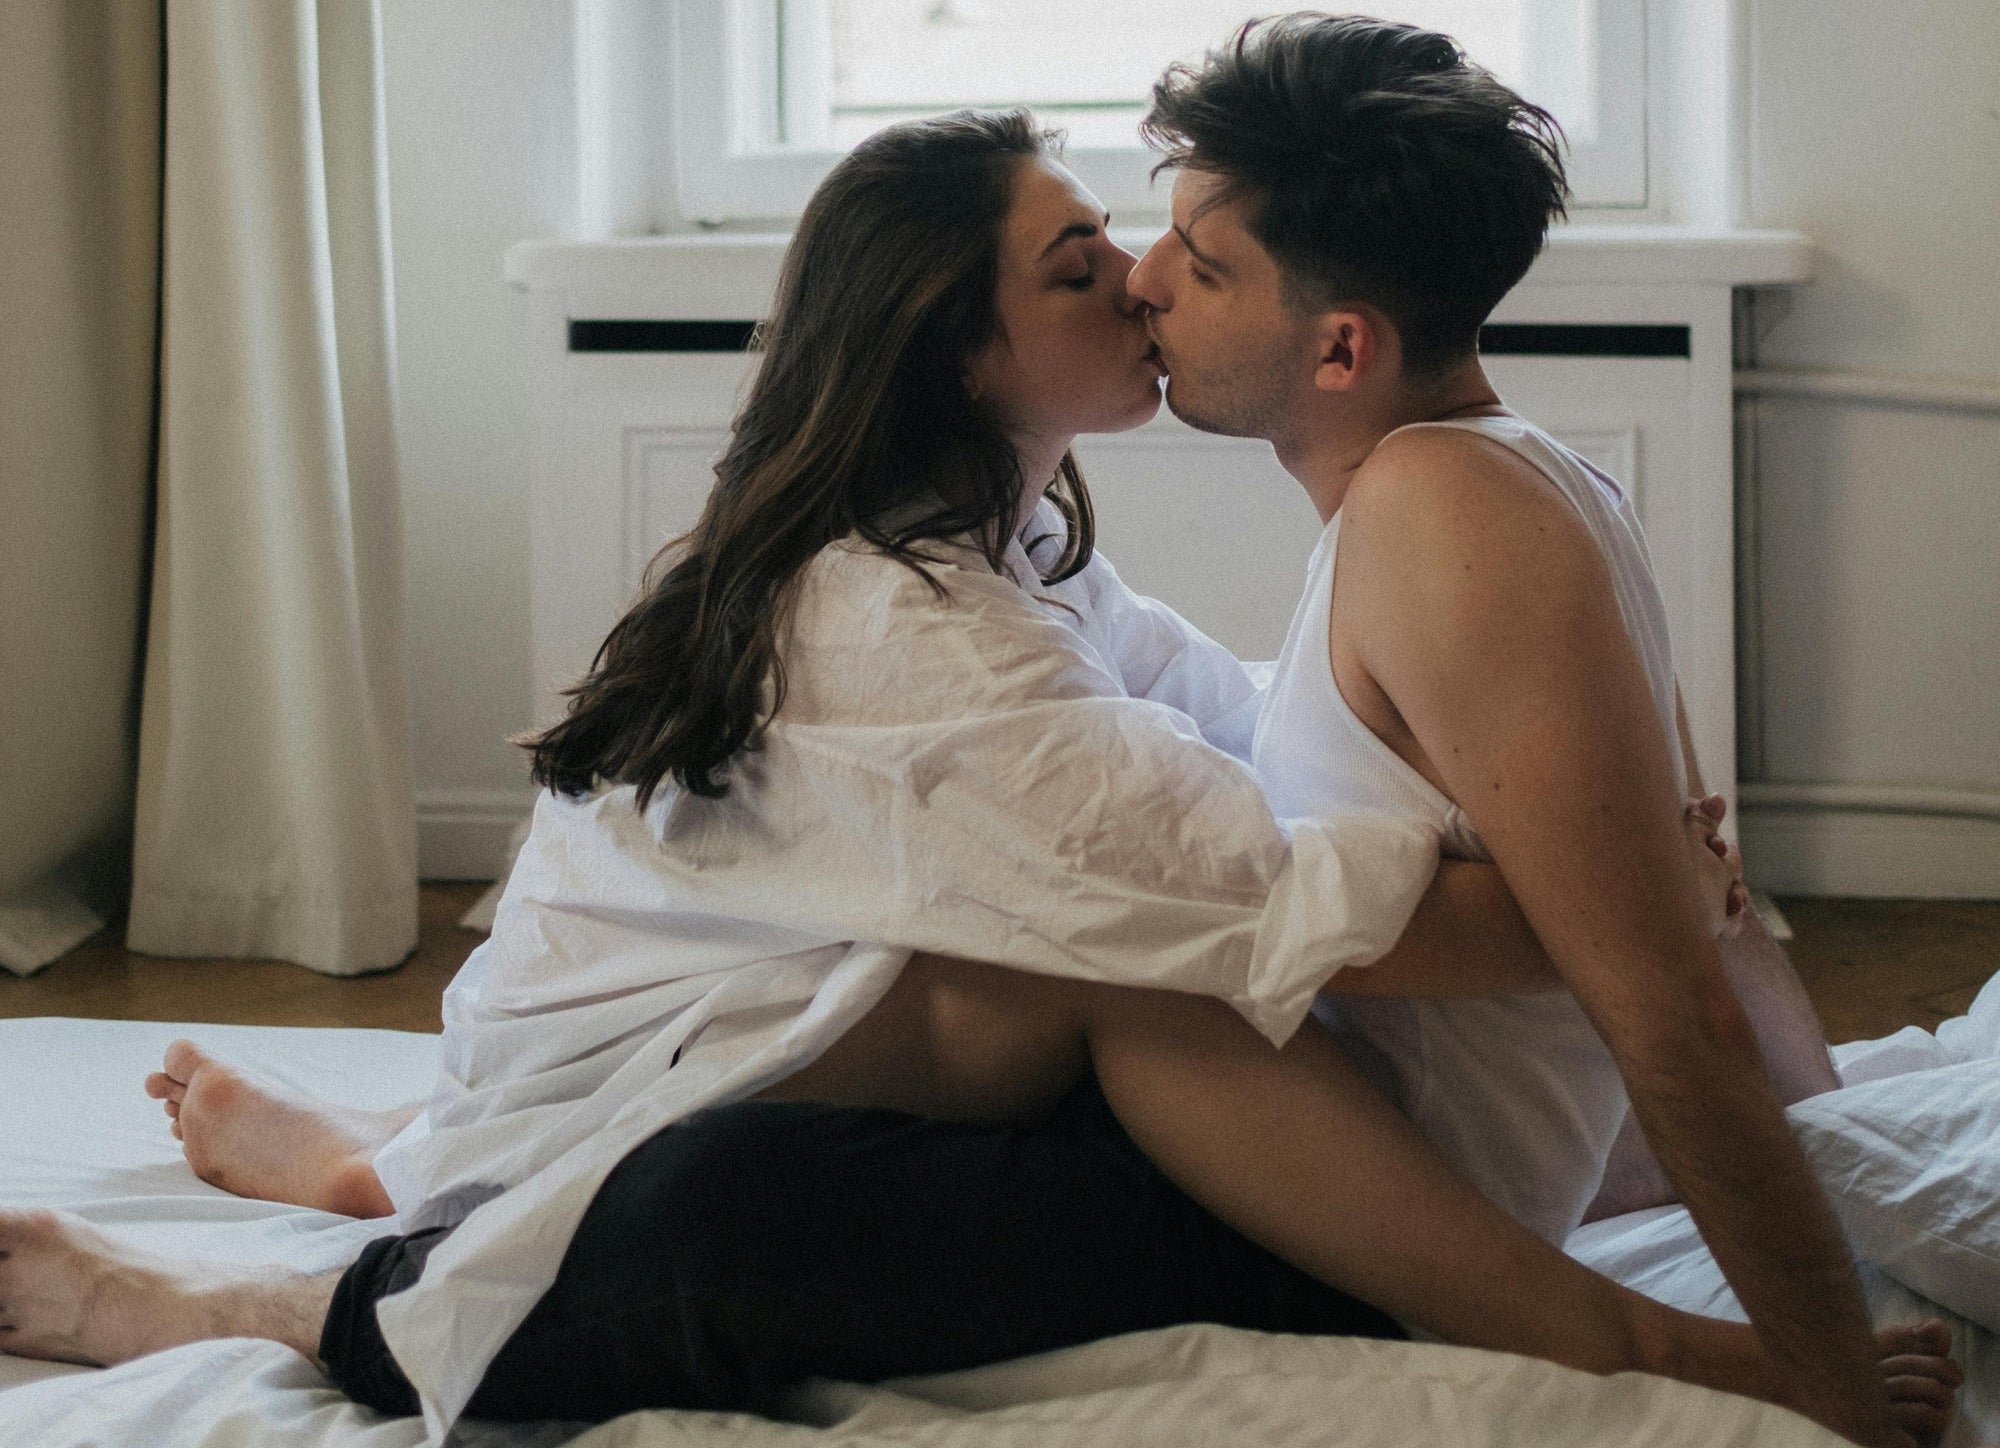 A loving couple is kissing on bed. This moment portrays the joy and satisfaction that can come from a healthy sex drive and fostering intimacy in a relationship.